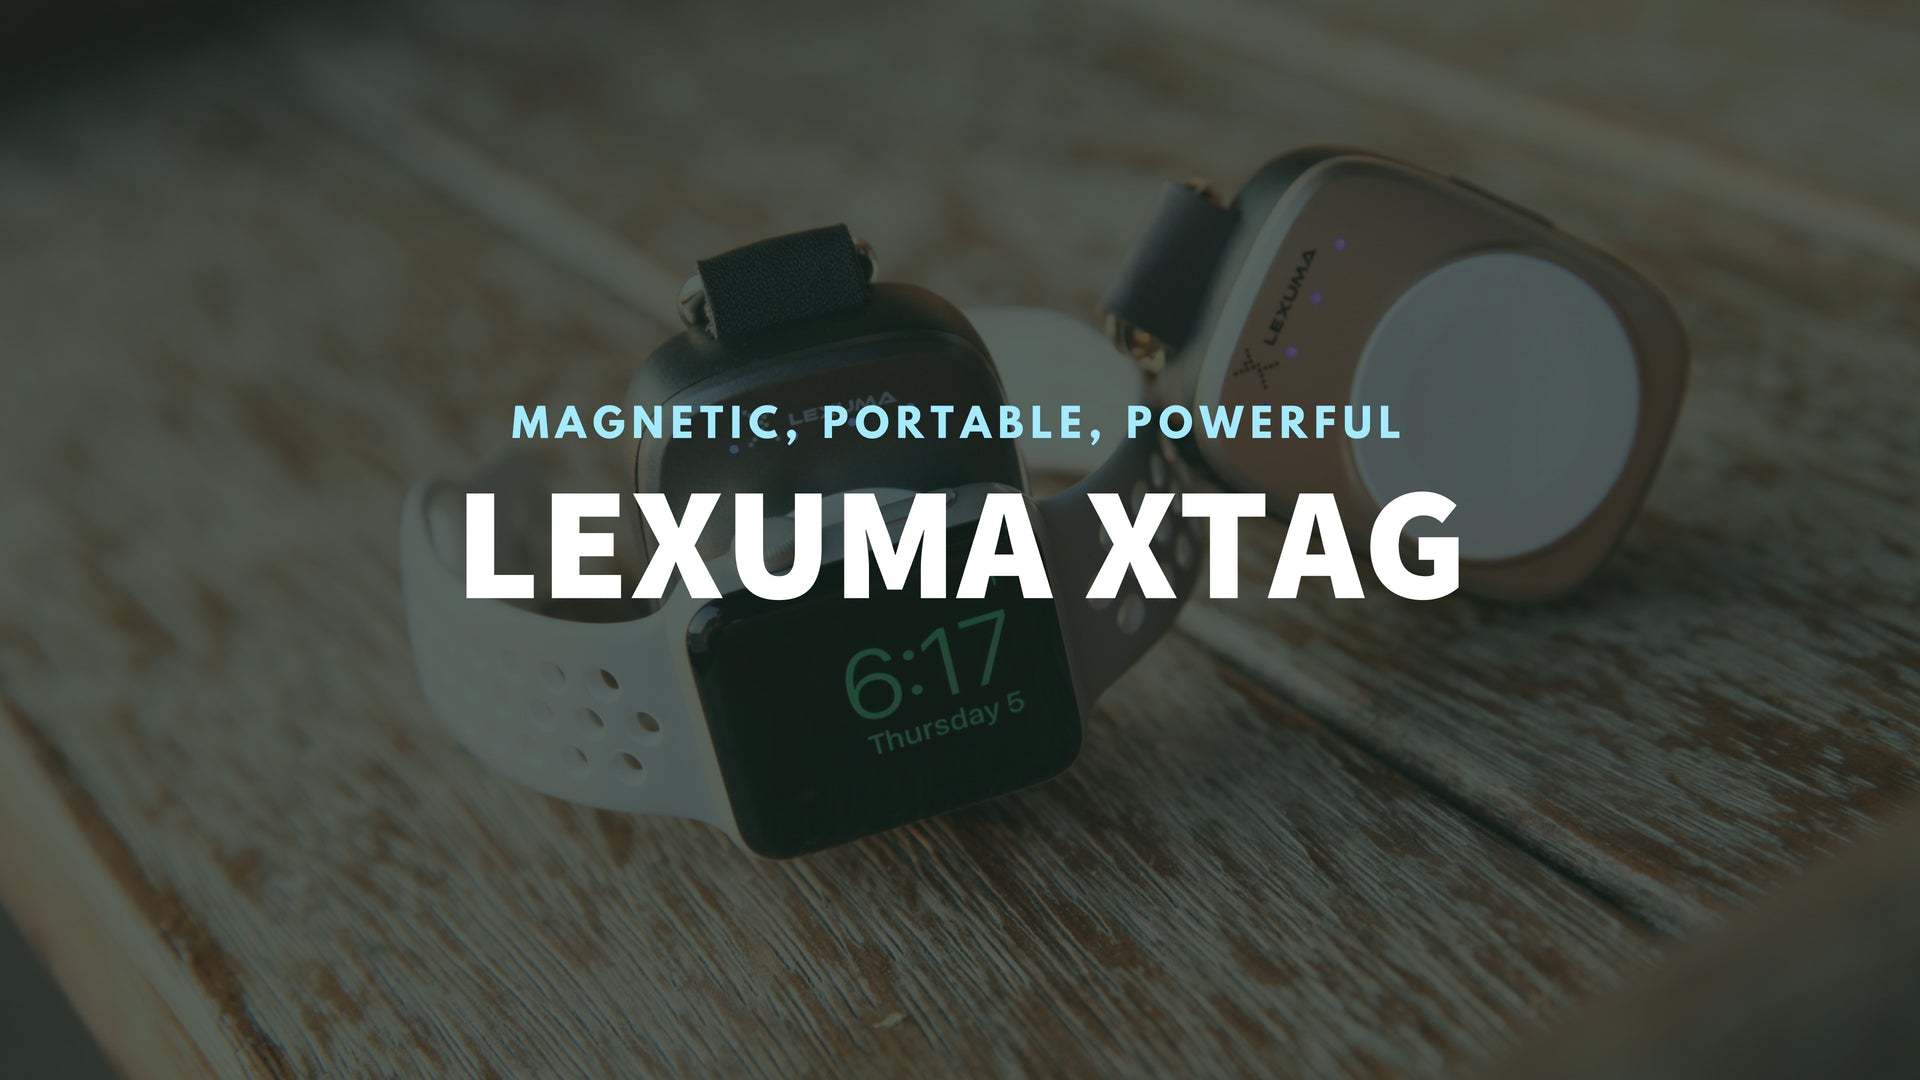 Lexuma 辣數碼 XTAG Apple Watch Portable Charger pantheon best portable 2019 keychain power bank case series 4 wireless charging belkin valet griffin amber charging case batterypro smashell power case mipow 2-in-1 keychain case capshi portable wireless charge best aftermarket charging case wireless charging case power bank portable adapter wireless  mfi certified best buy best buy uk anker iwatch insignia charging stand target series 3 review